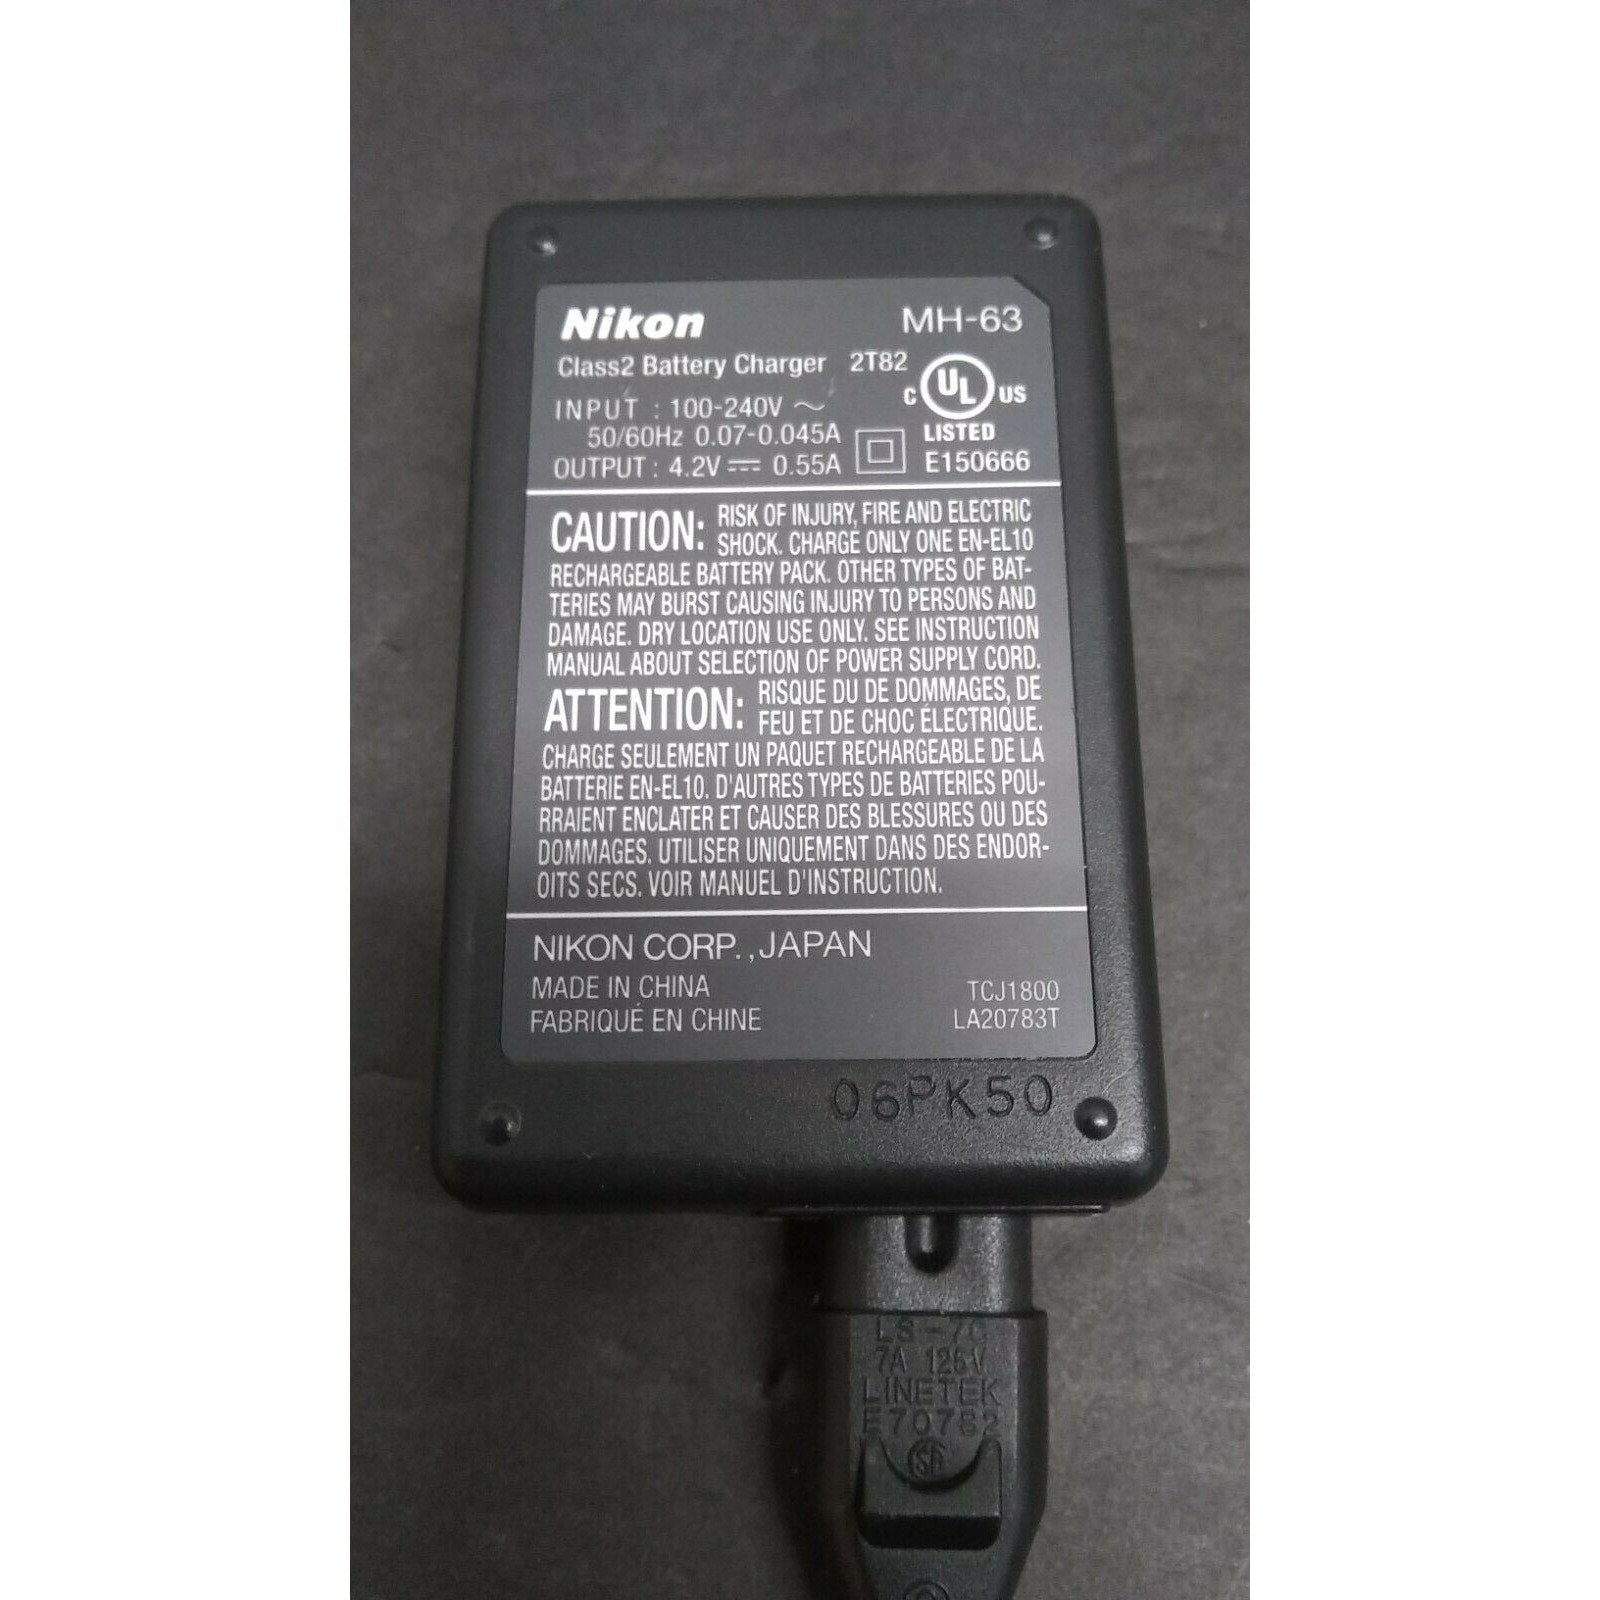 Nikon Coolpix MH-63 Battery Charger